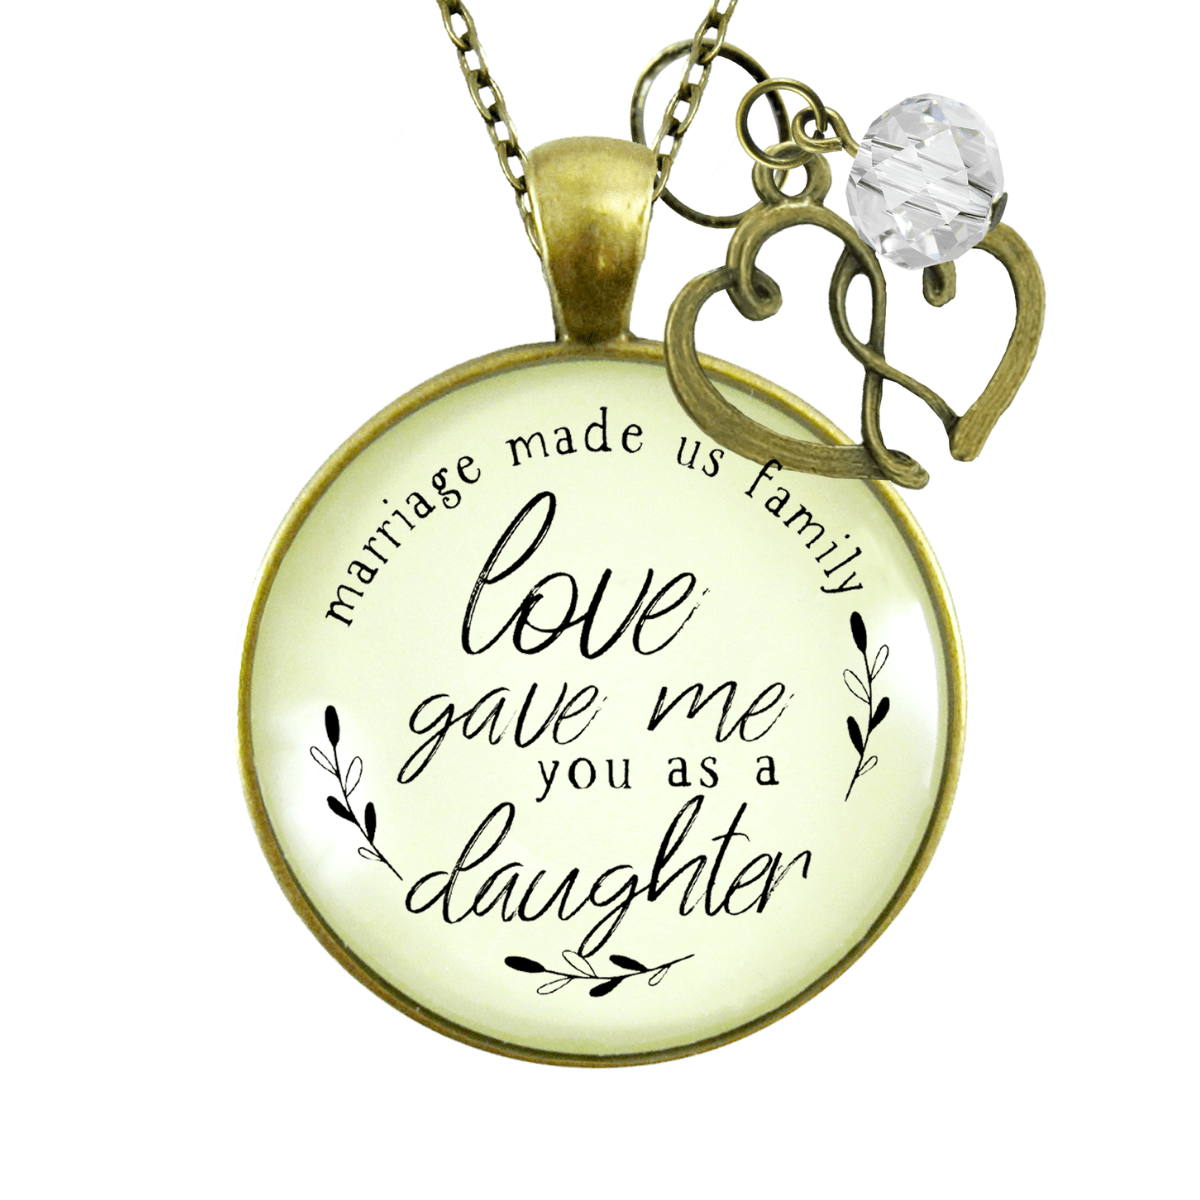 20 Mother's Day Gifts for a Daughter-in-Law